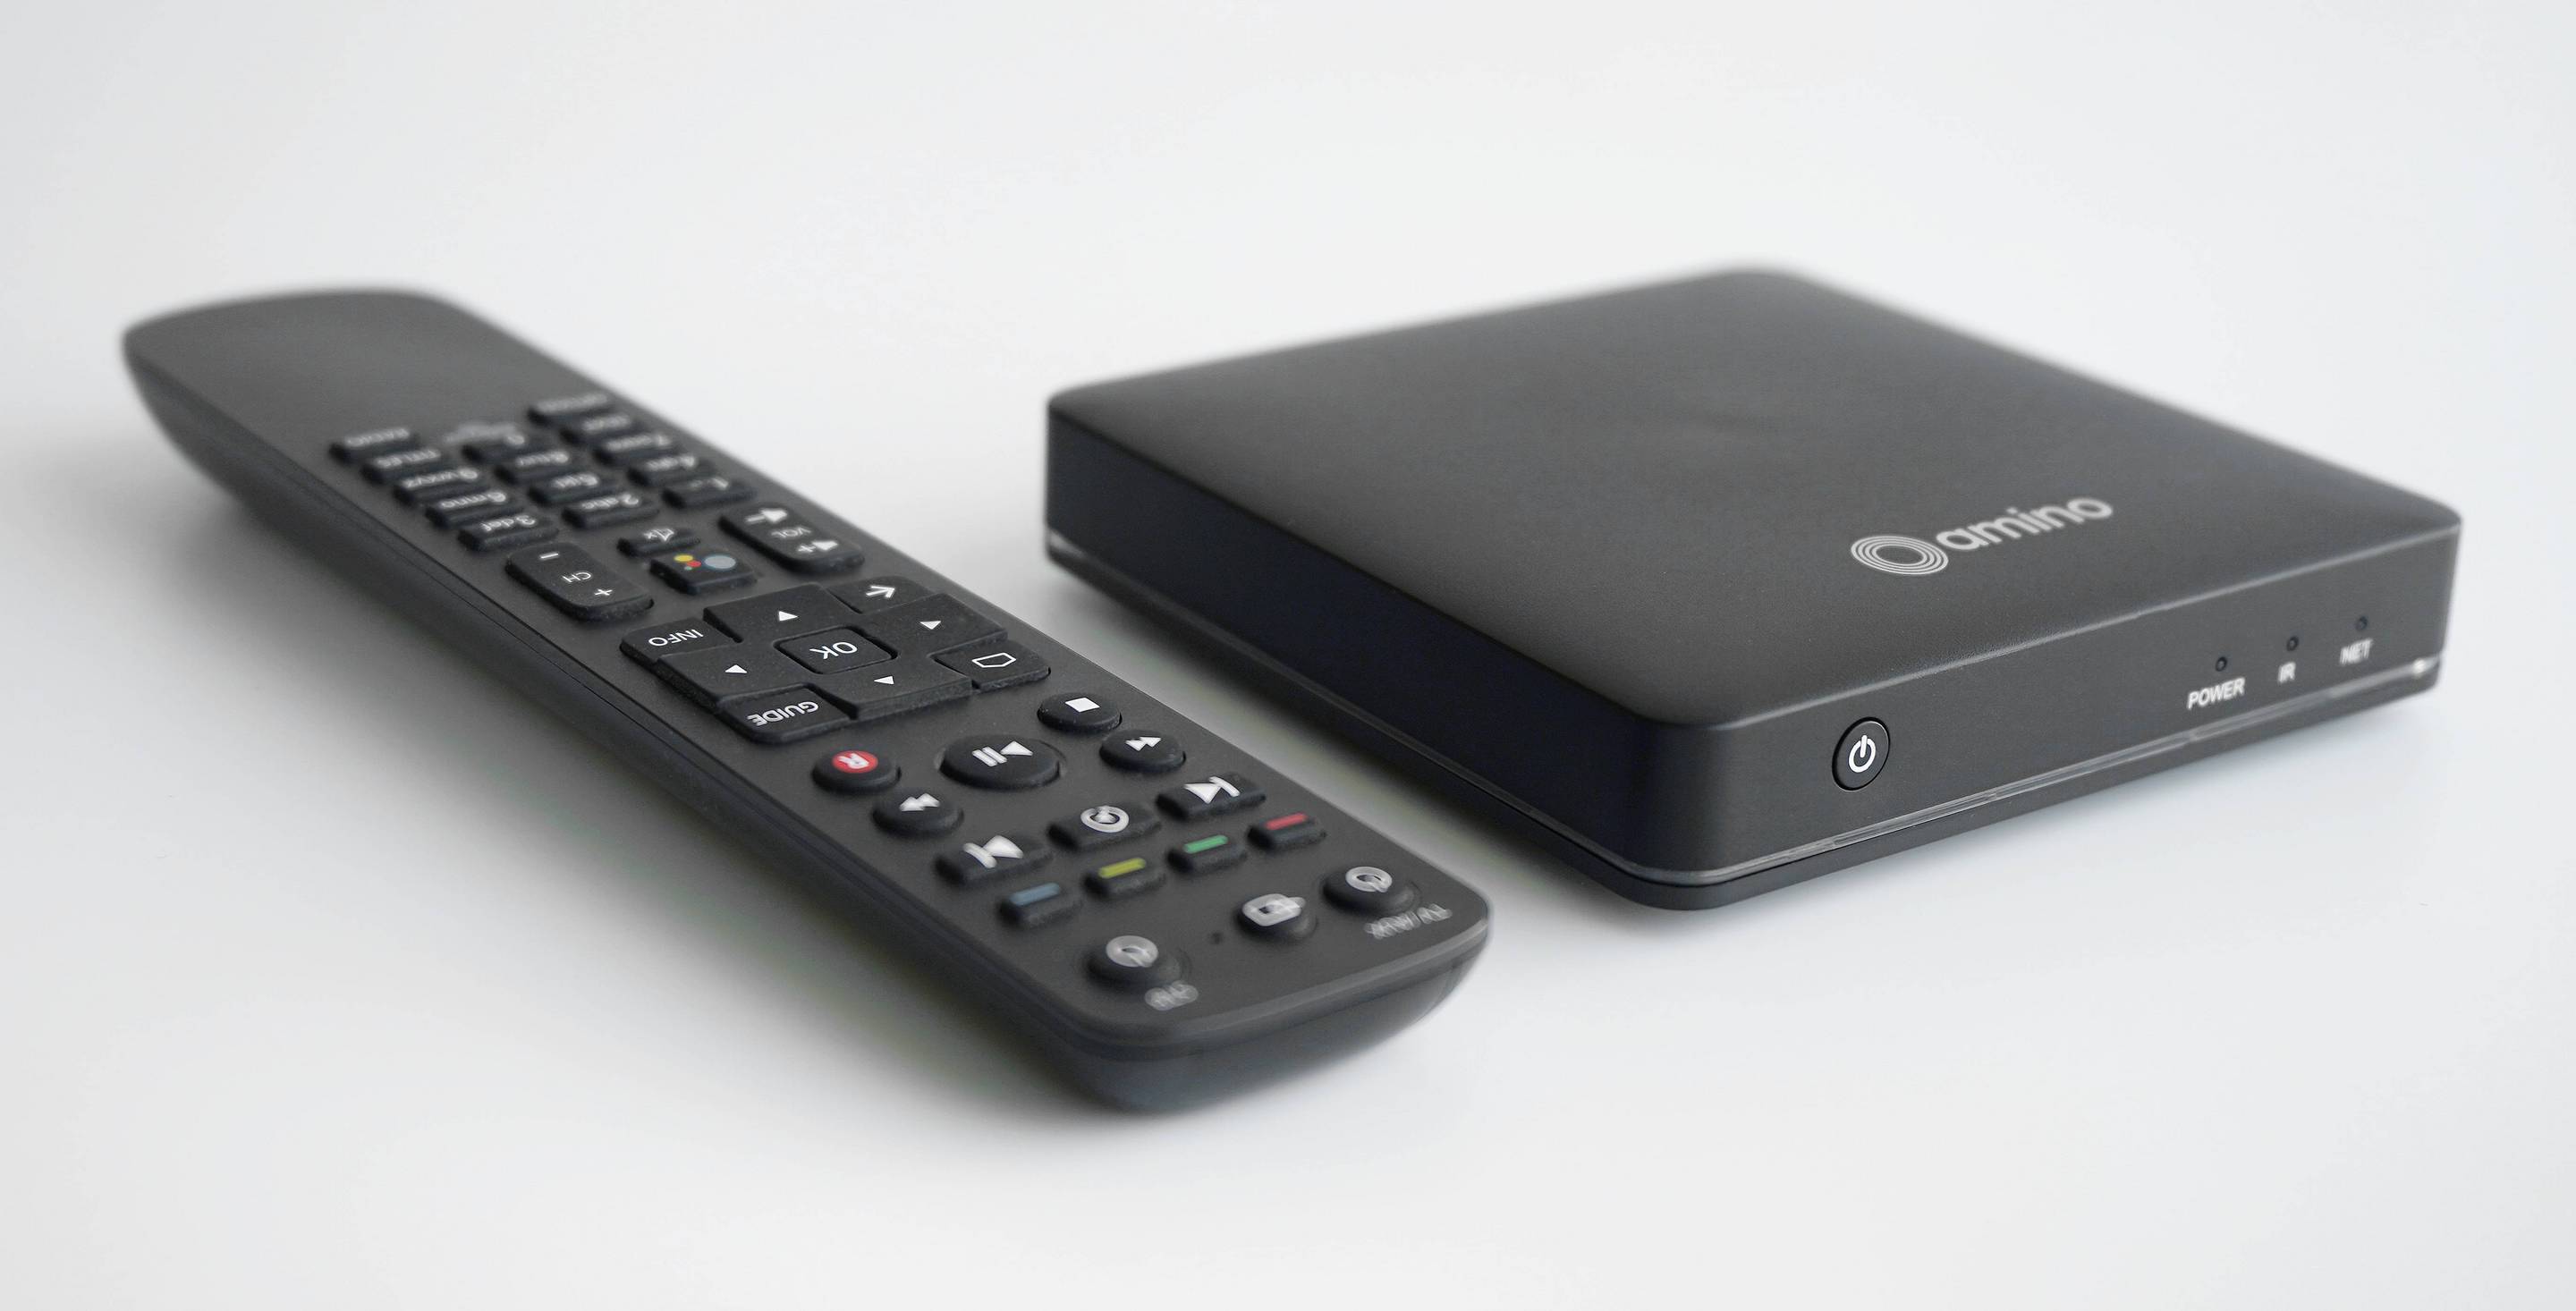 Green TV Box with remote control for extra class TV enjoyment